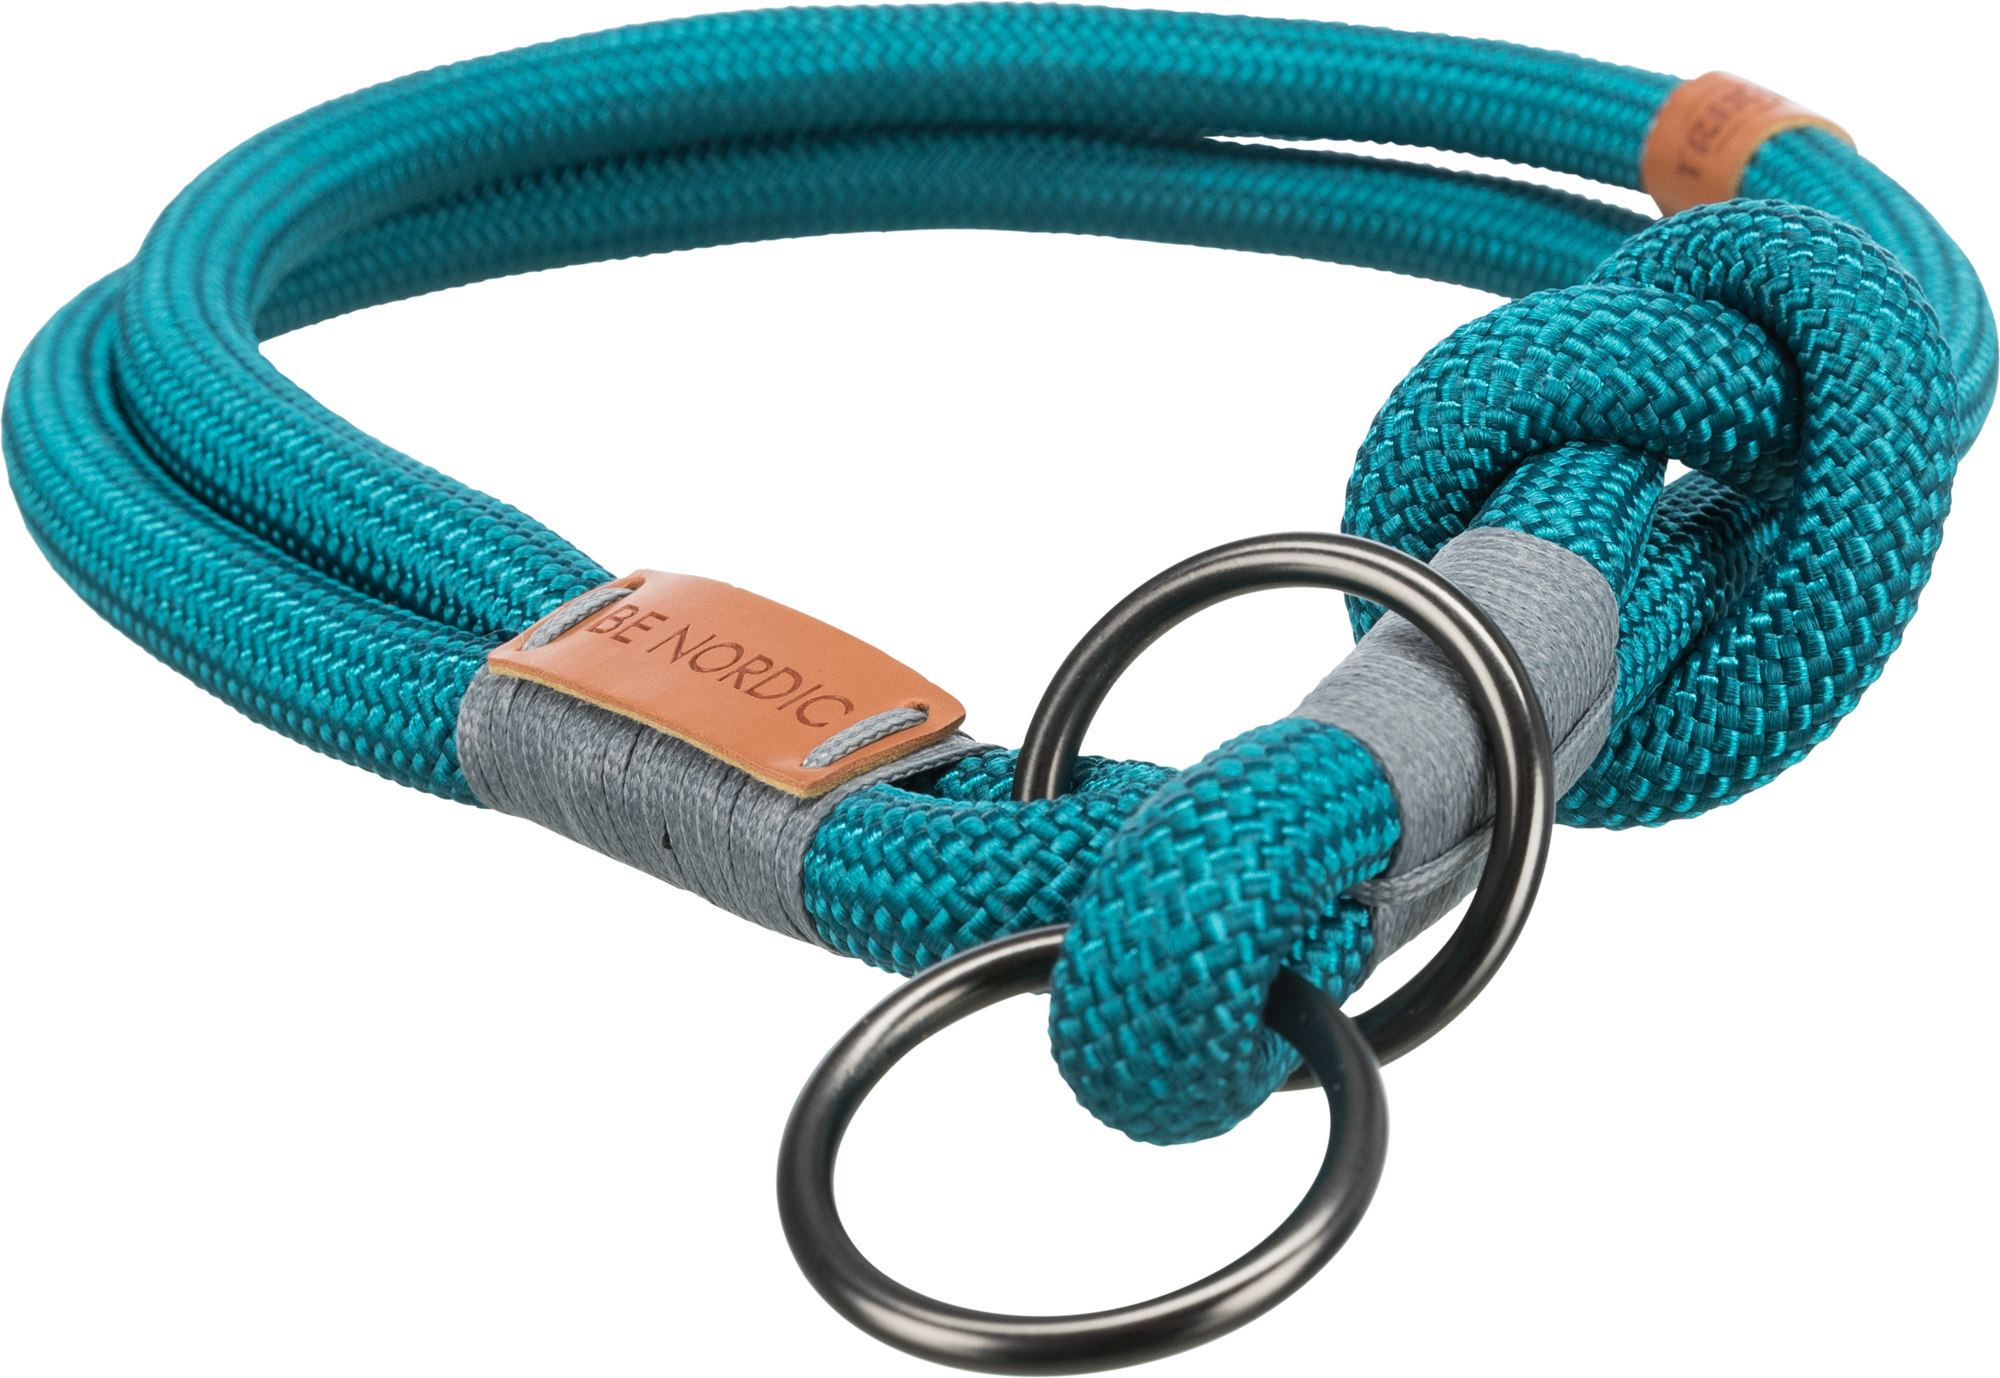 TRIXIE BE NORDIC Zug-Stopp-Halsband TRIXIE BE NORDIC Zug-Stopp-Halsband, L: 50 cm/ø 13 mm, petrol/hellgrau